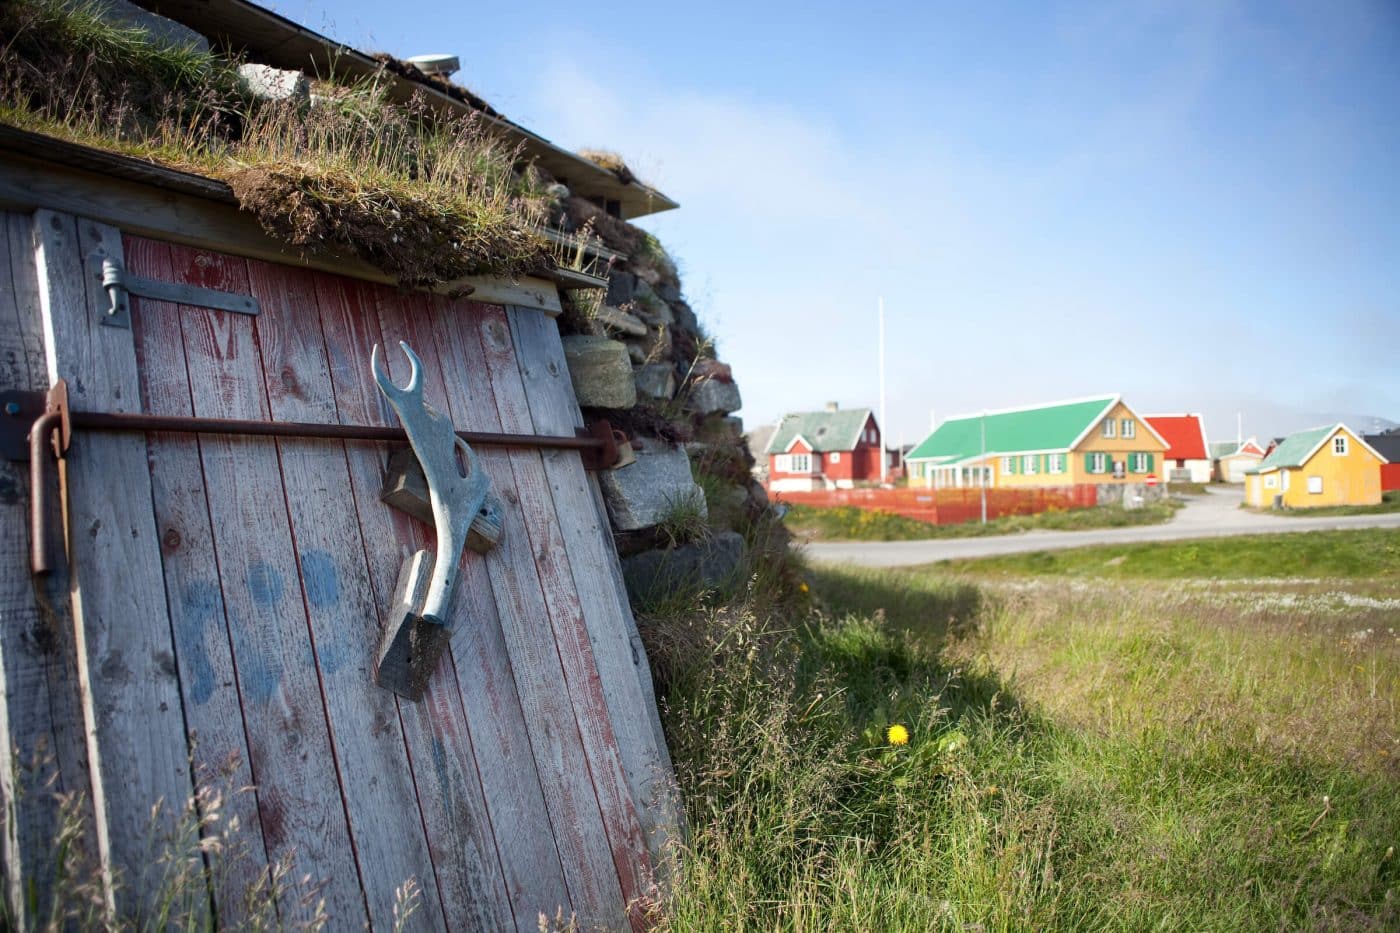 A Turf house from Paamiut in Greenland. By Angu Motzfeldt